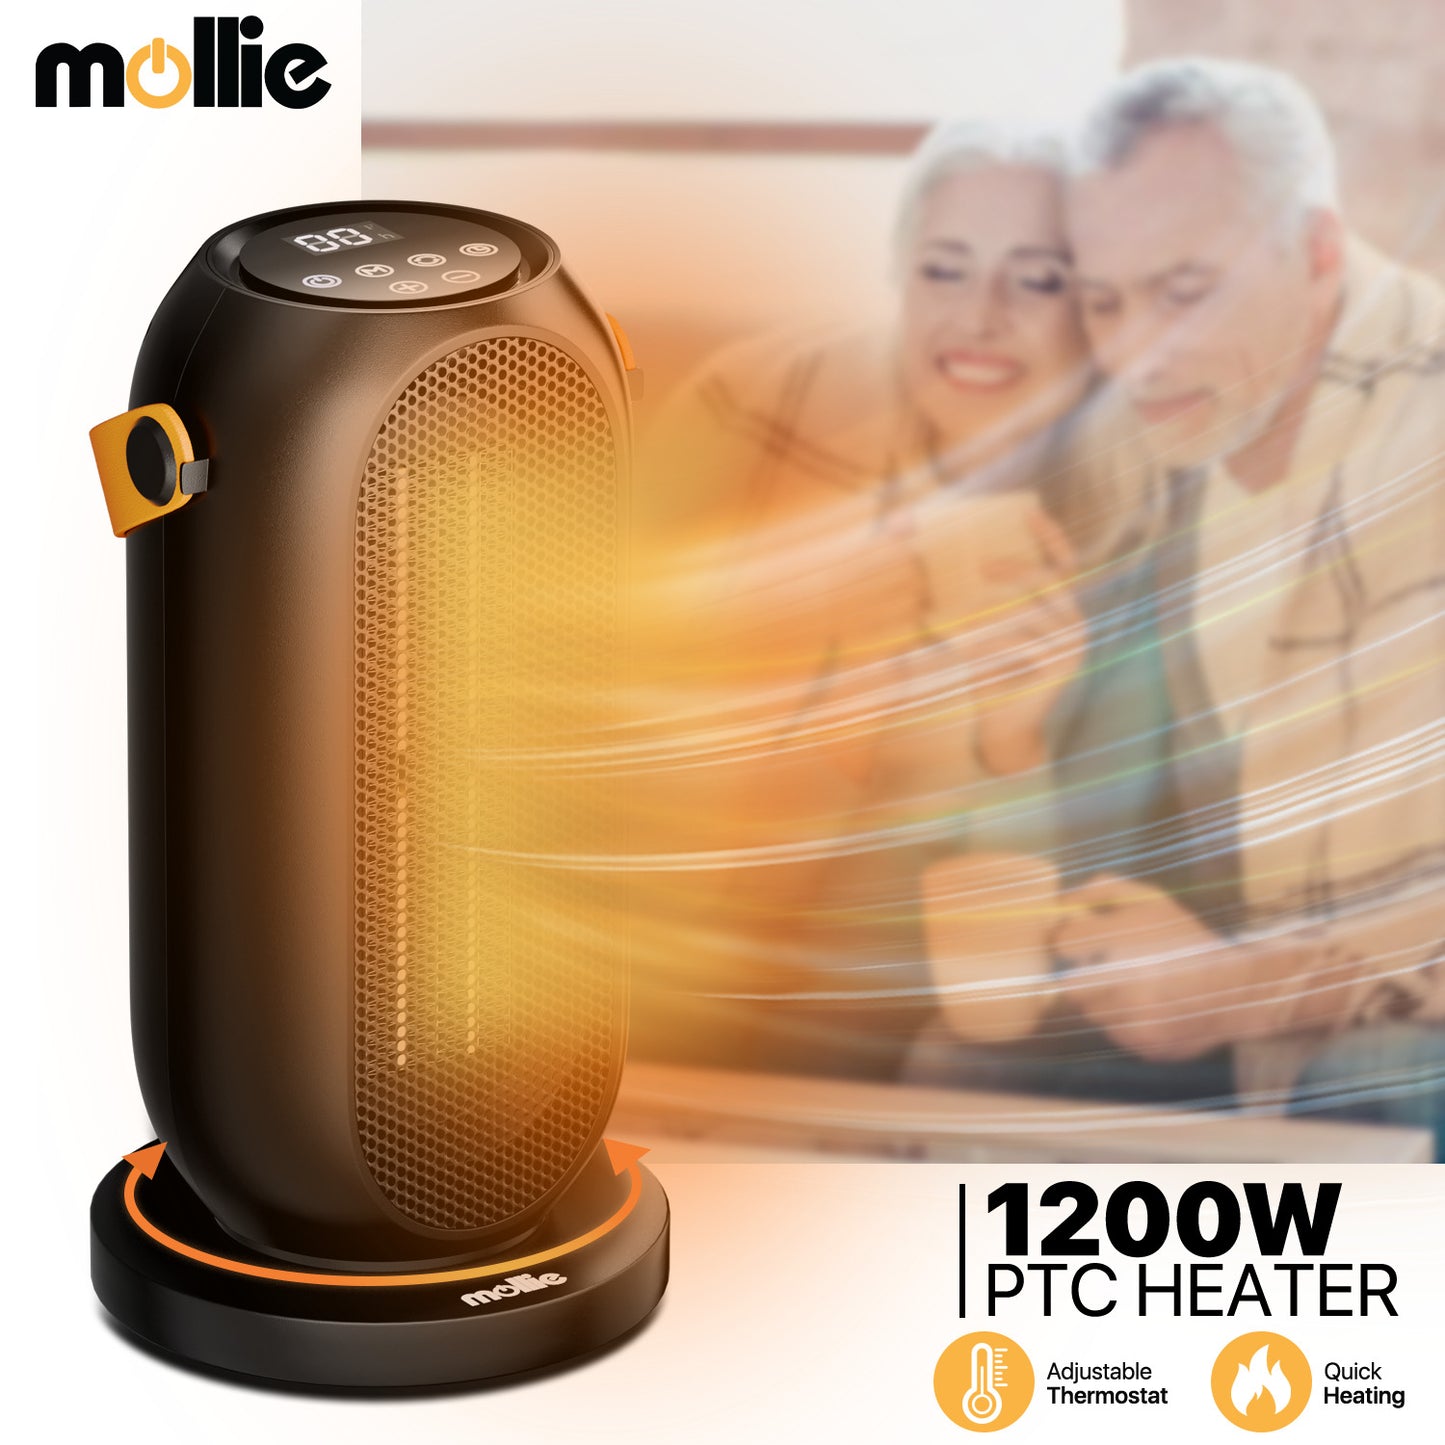 1200W Electric Portable PTC 160 sq.ft Space  Heater - Digital Display